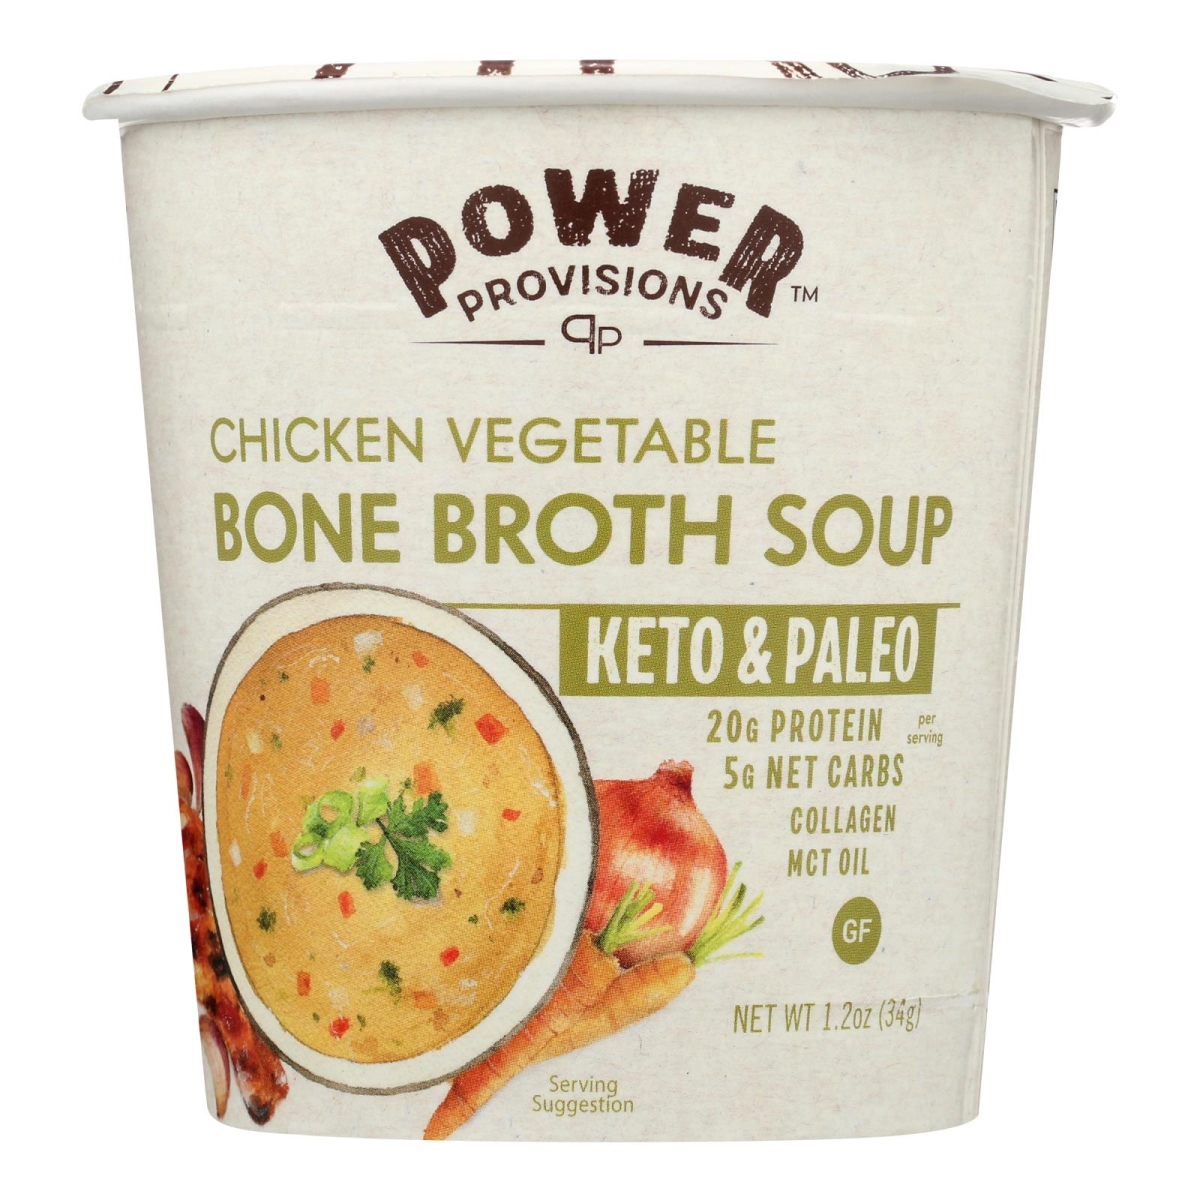 Picture of Power Provisions 2529394 1.2 oz Chicken Vegetable Bone Broth Soup